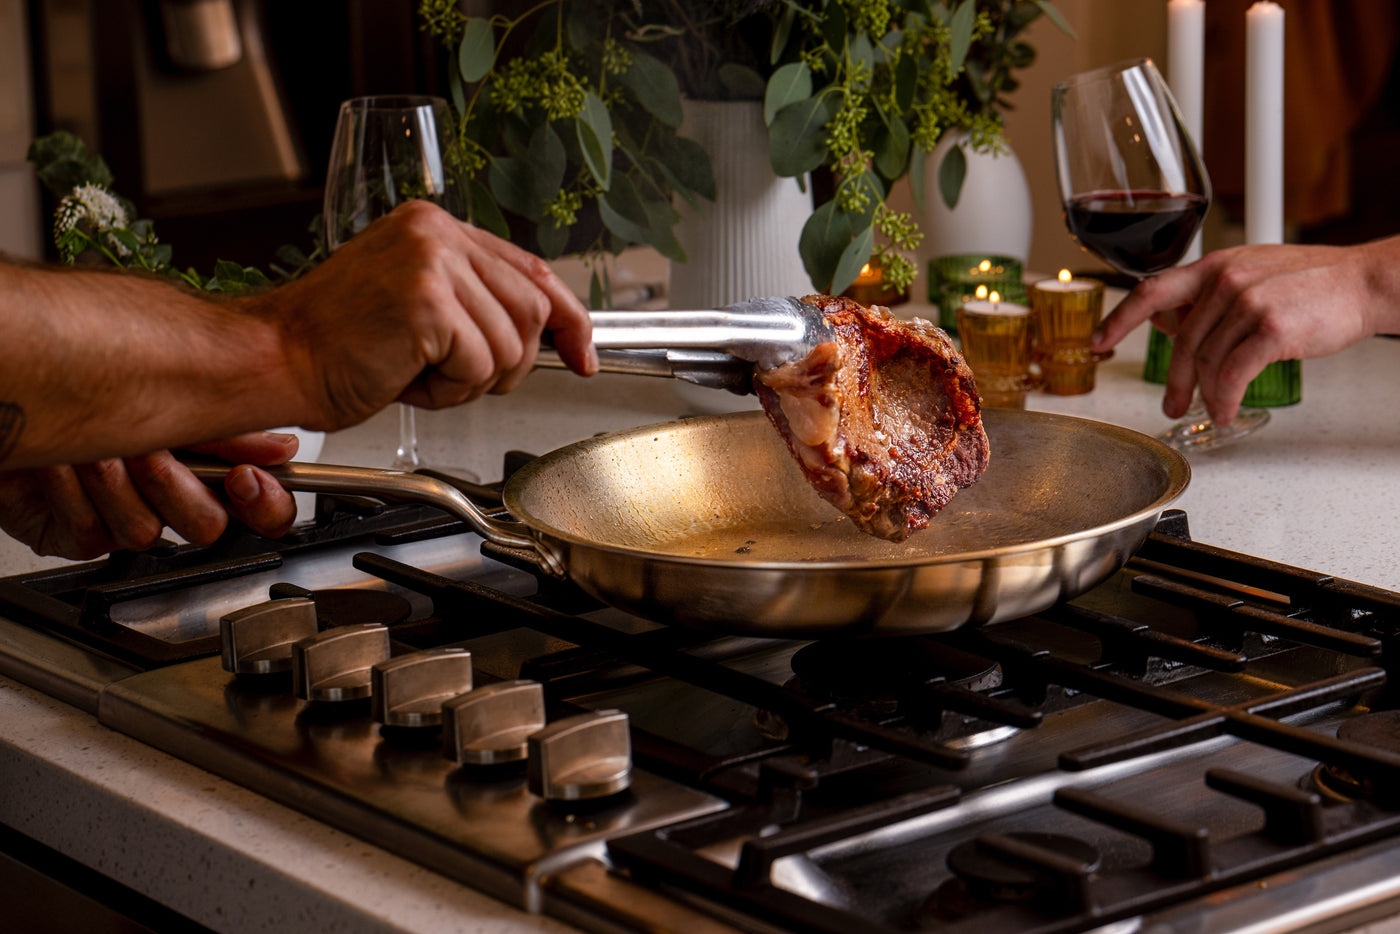 Hammer Stahl Cookware: Stainless Steel Made in the USA - Kitchenware News &  Housewares ReviewKitchenware News & Housewares Review